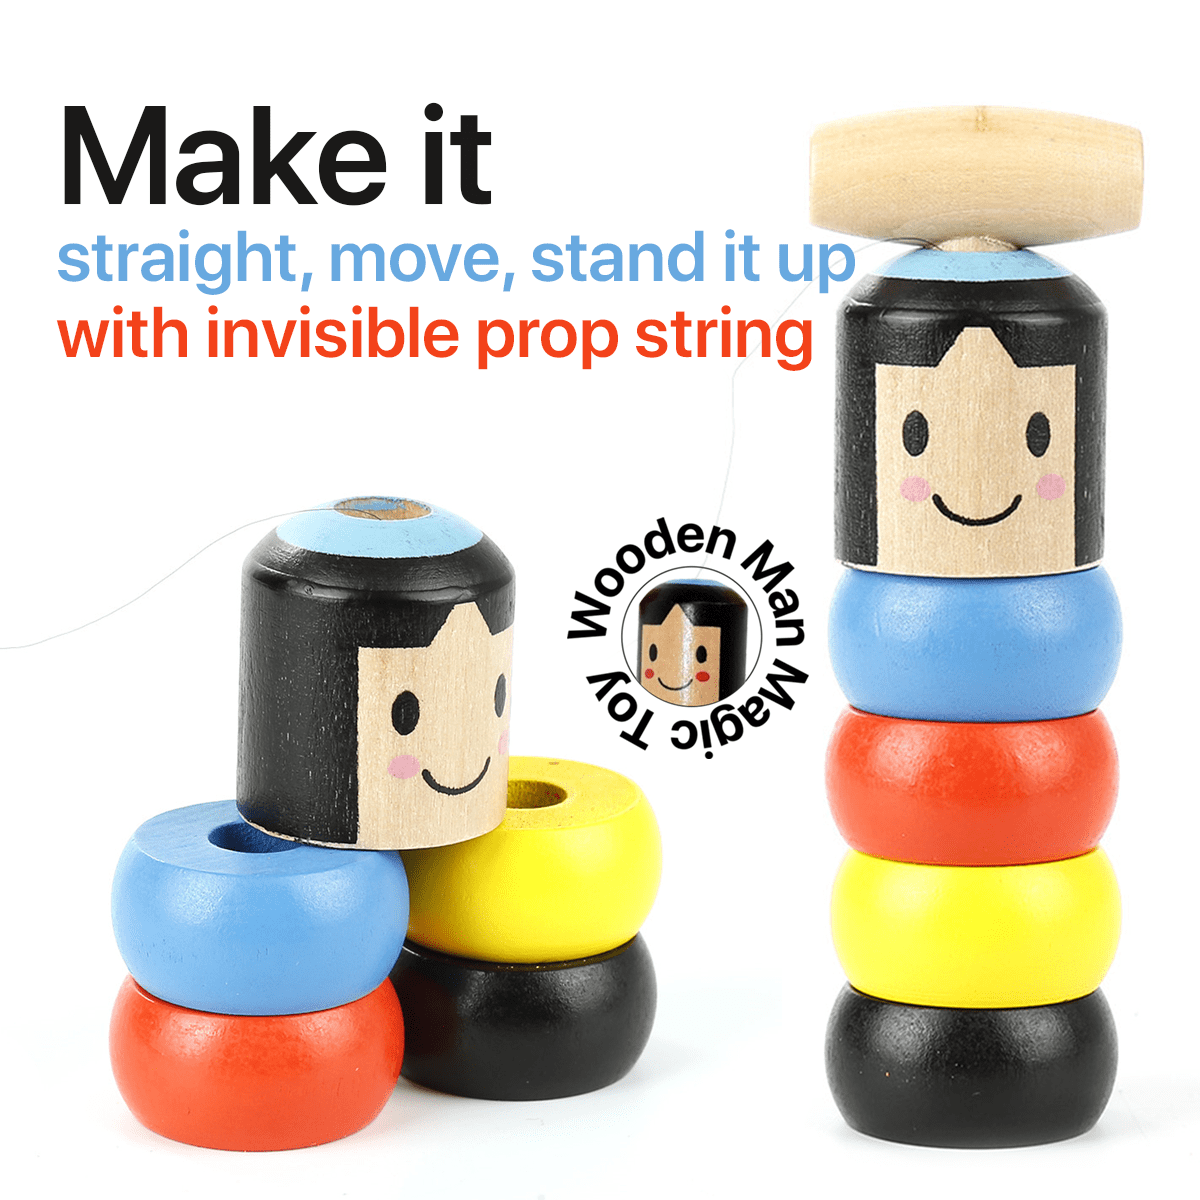 Unbreakable Wooden Toy The Wooden Stubborn Man Toy FUNNY Kid Gifts d d 